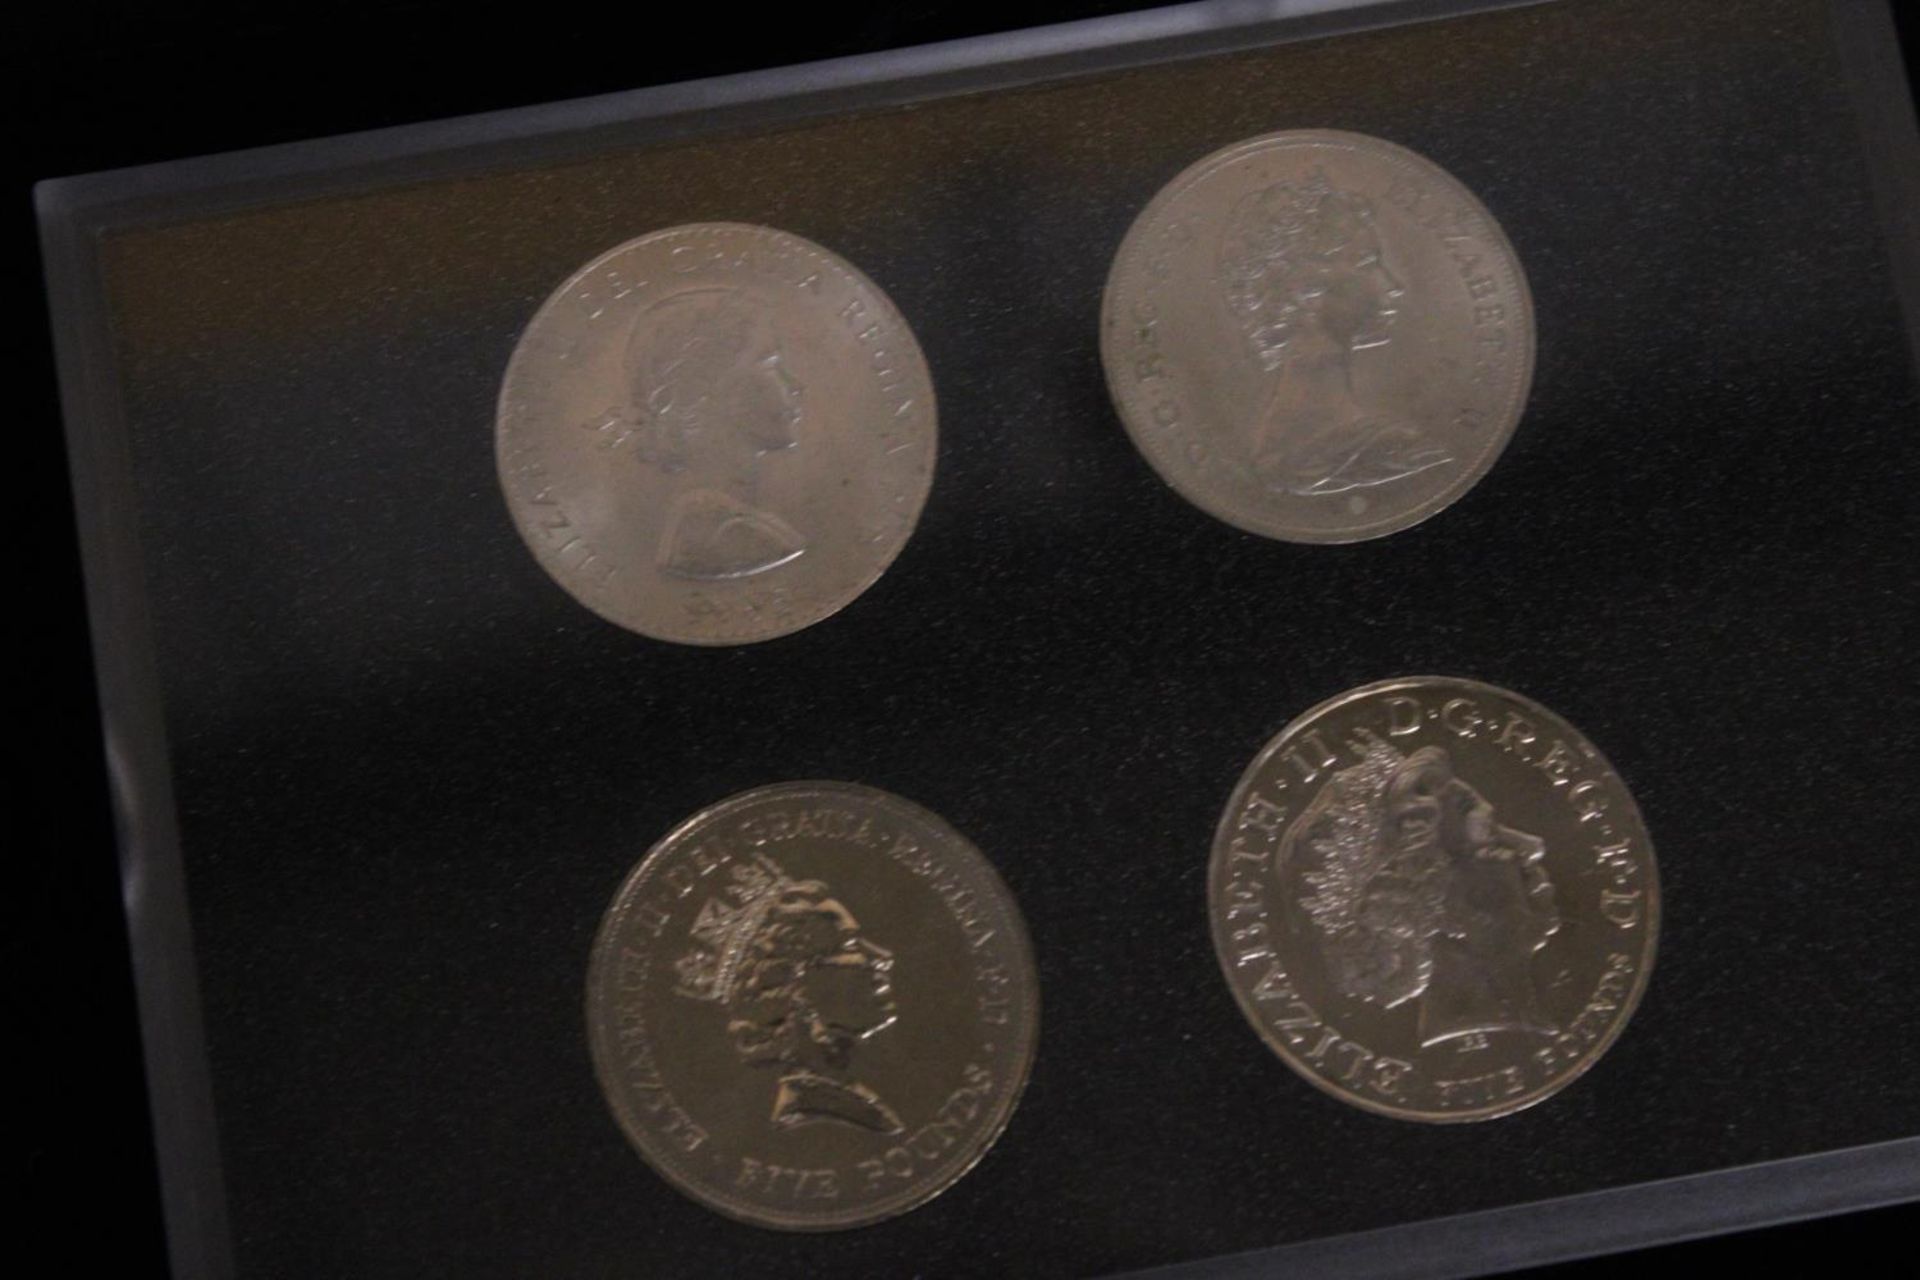 A WESTMINSTER BOXED FOUR COIN SET "THE PORTRAITS OF A QUEEN" WITH CERTIFICATE OF AUTHENTICITY - Bild 3 aus 5